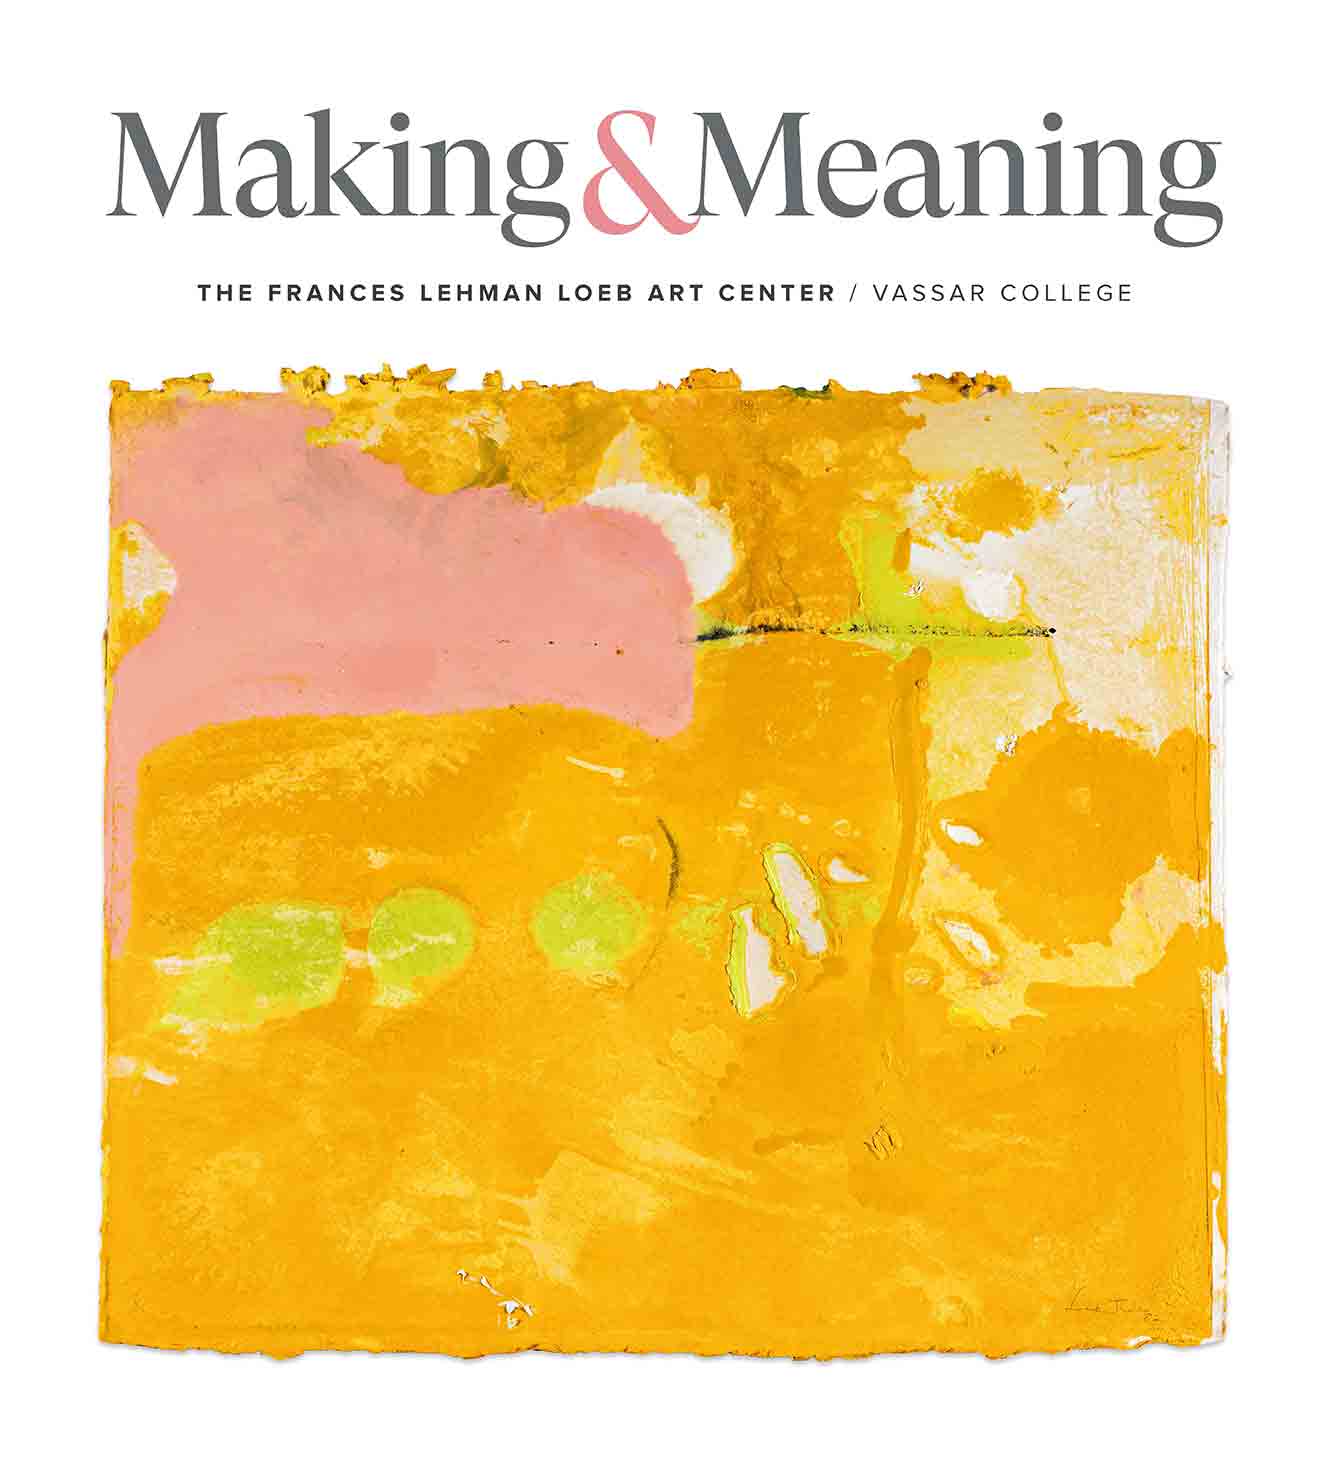 A magazine cover with the words "Making and Meaning: The Frances Lehman Loeb Art Center, Vassar College". The cover shows an abstract orange design.